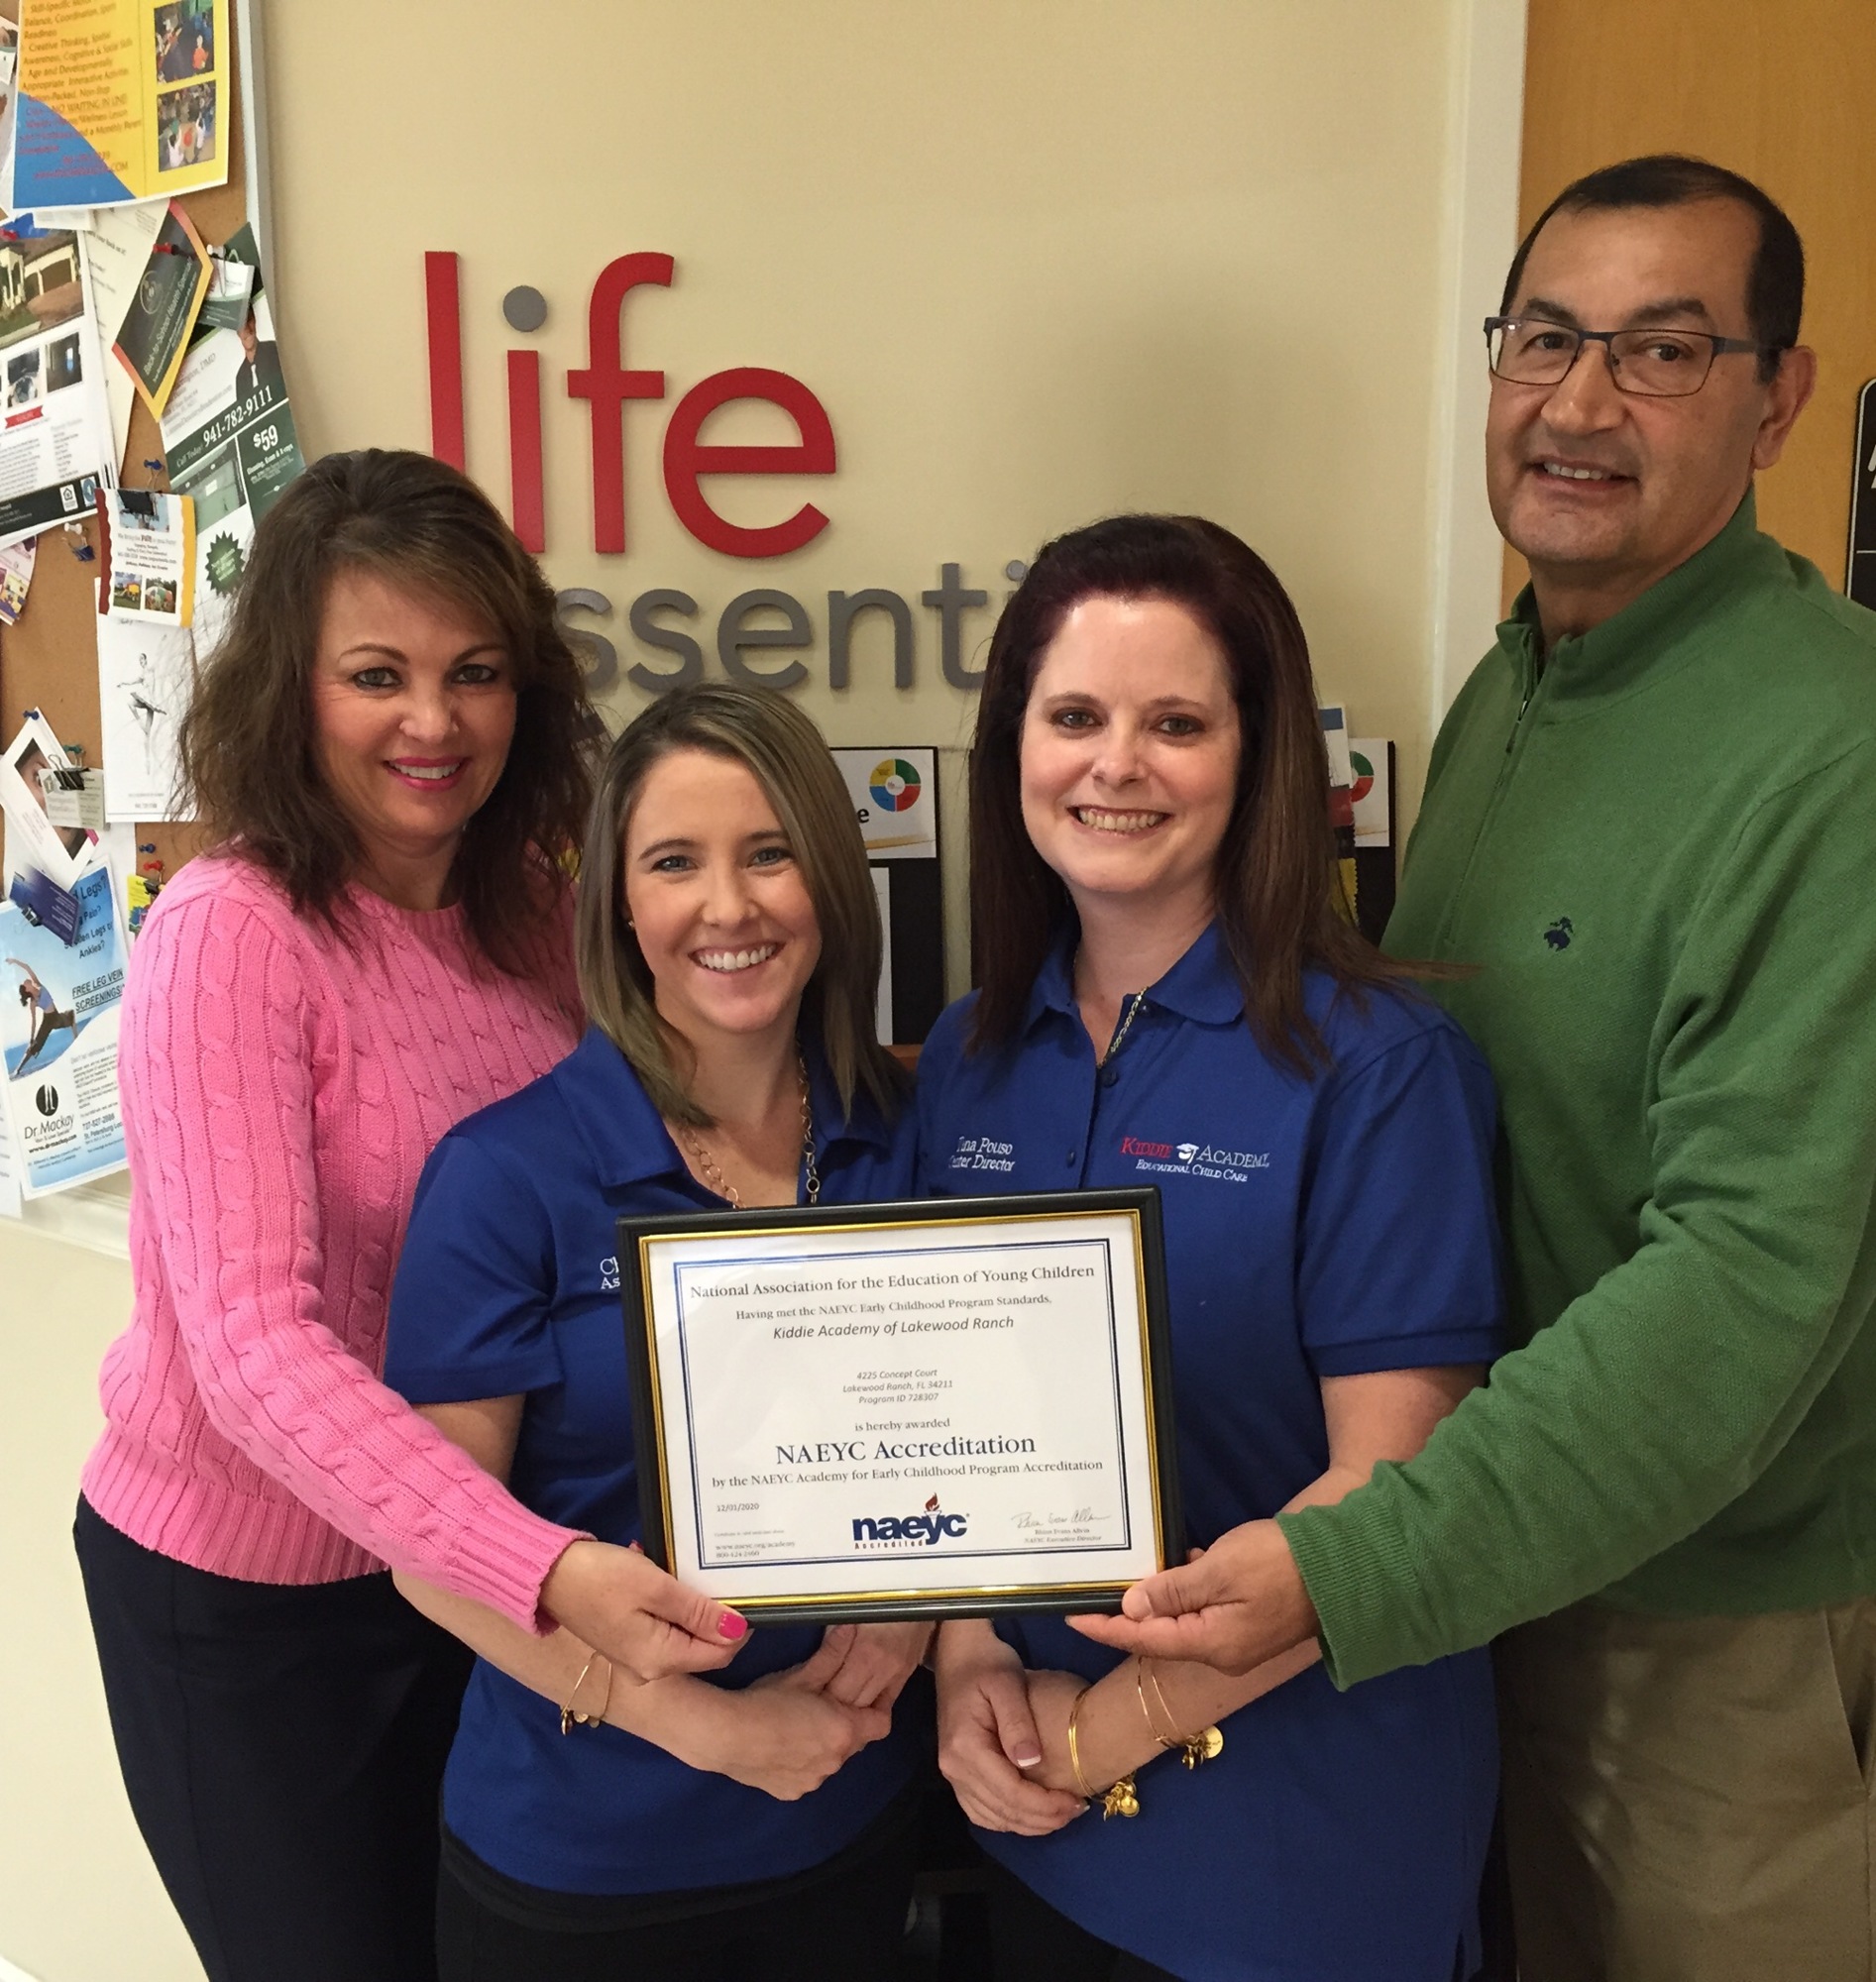 Marina Woolf-Schmidt, Chelsea Jervis, Tina Pouso and Bill Schmidt show off Kiddie Academy's National Accreditation certificate.